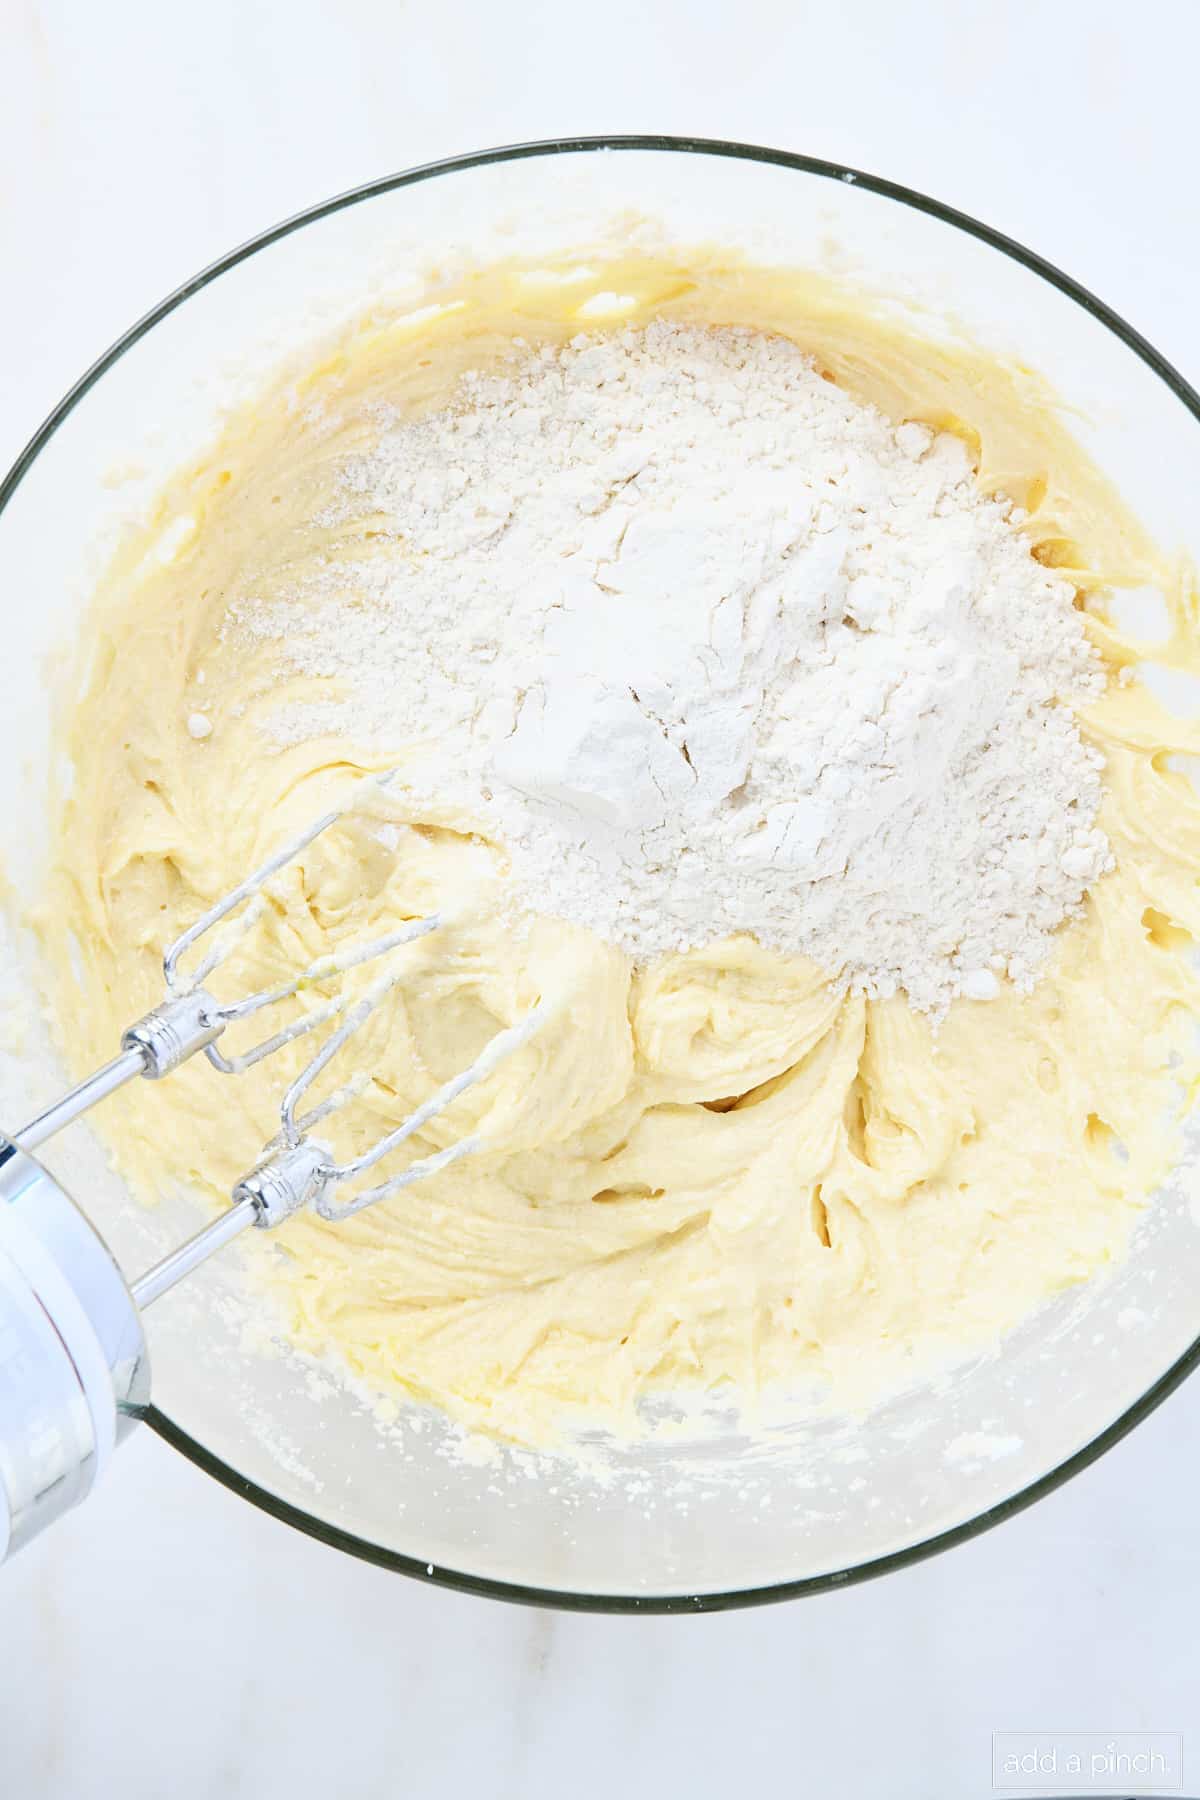 Glass mixing bowl has flour added to pound cake batter to mix with hand mixer.